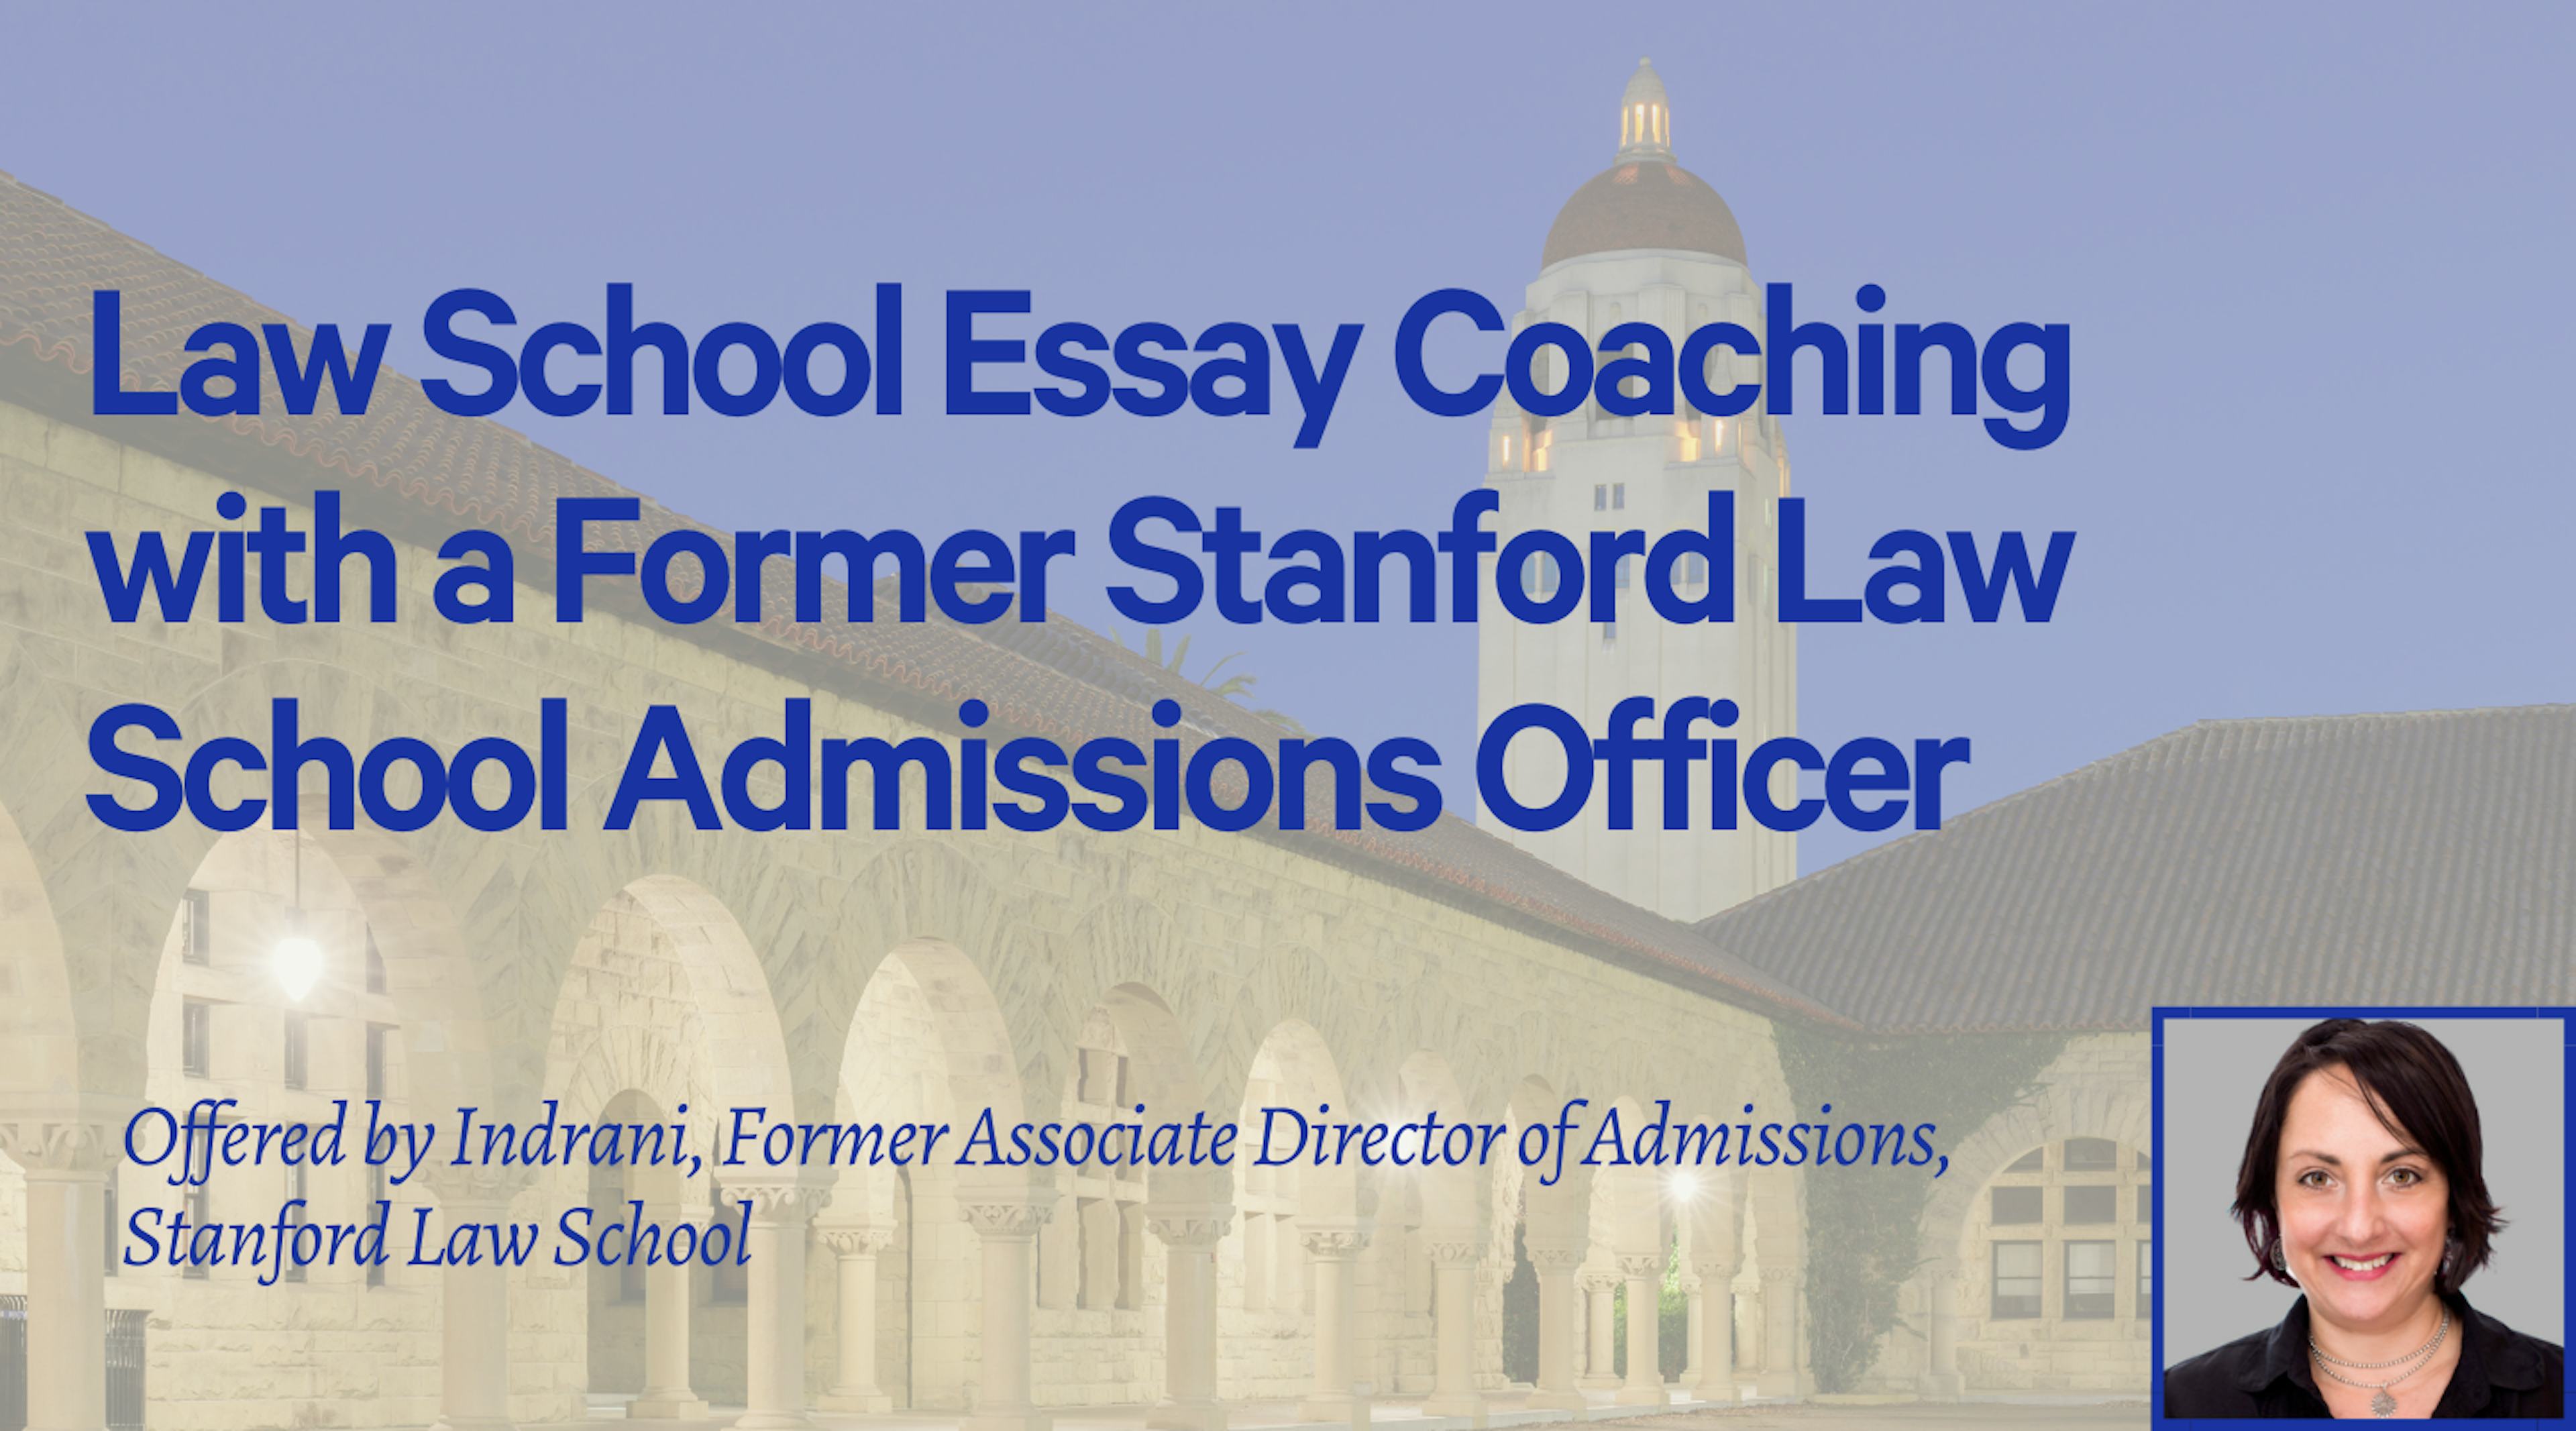 Law School Essays (1 essay) with a Former Stanford Admissions Officer